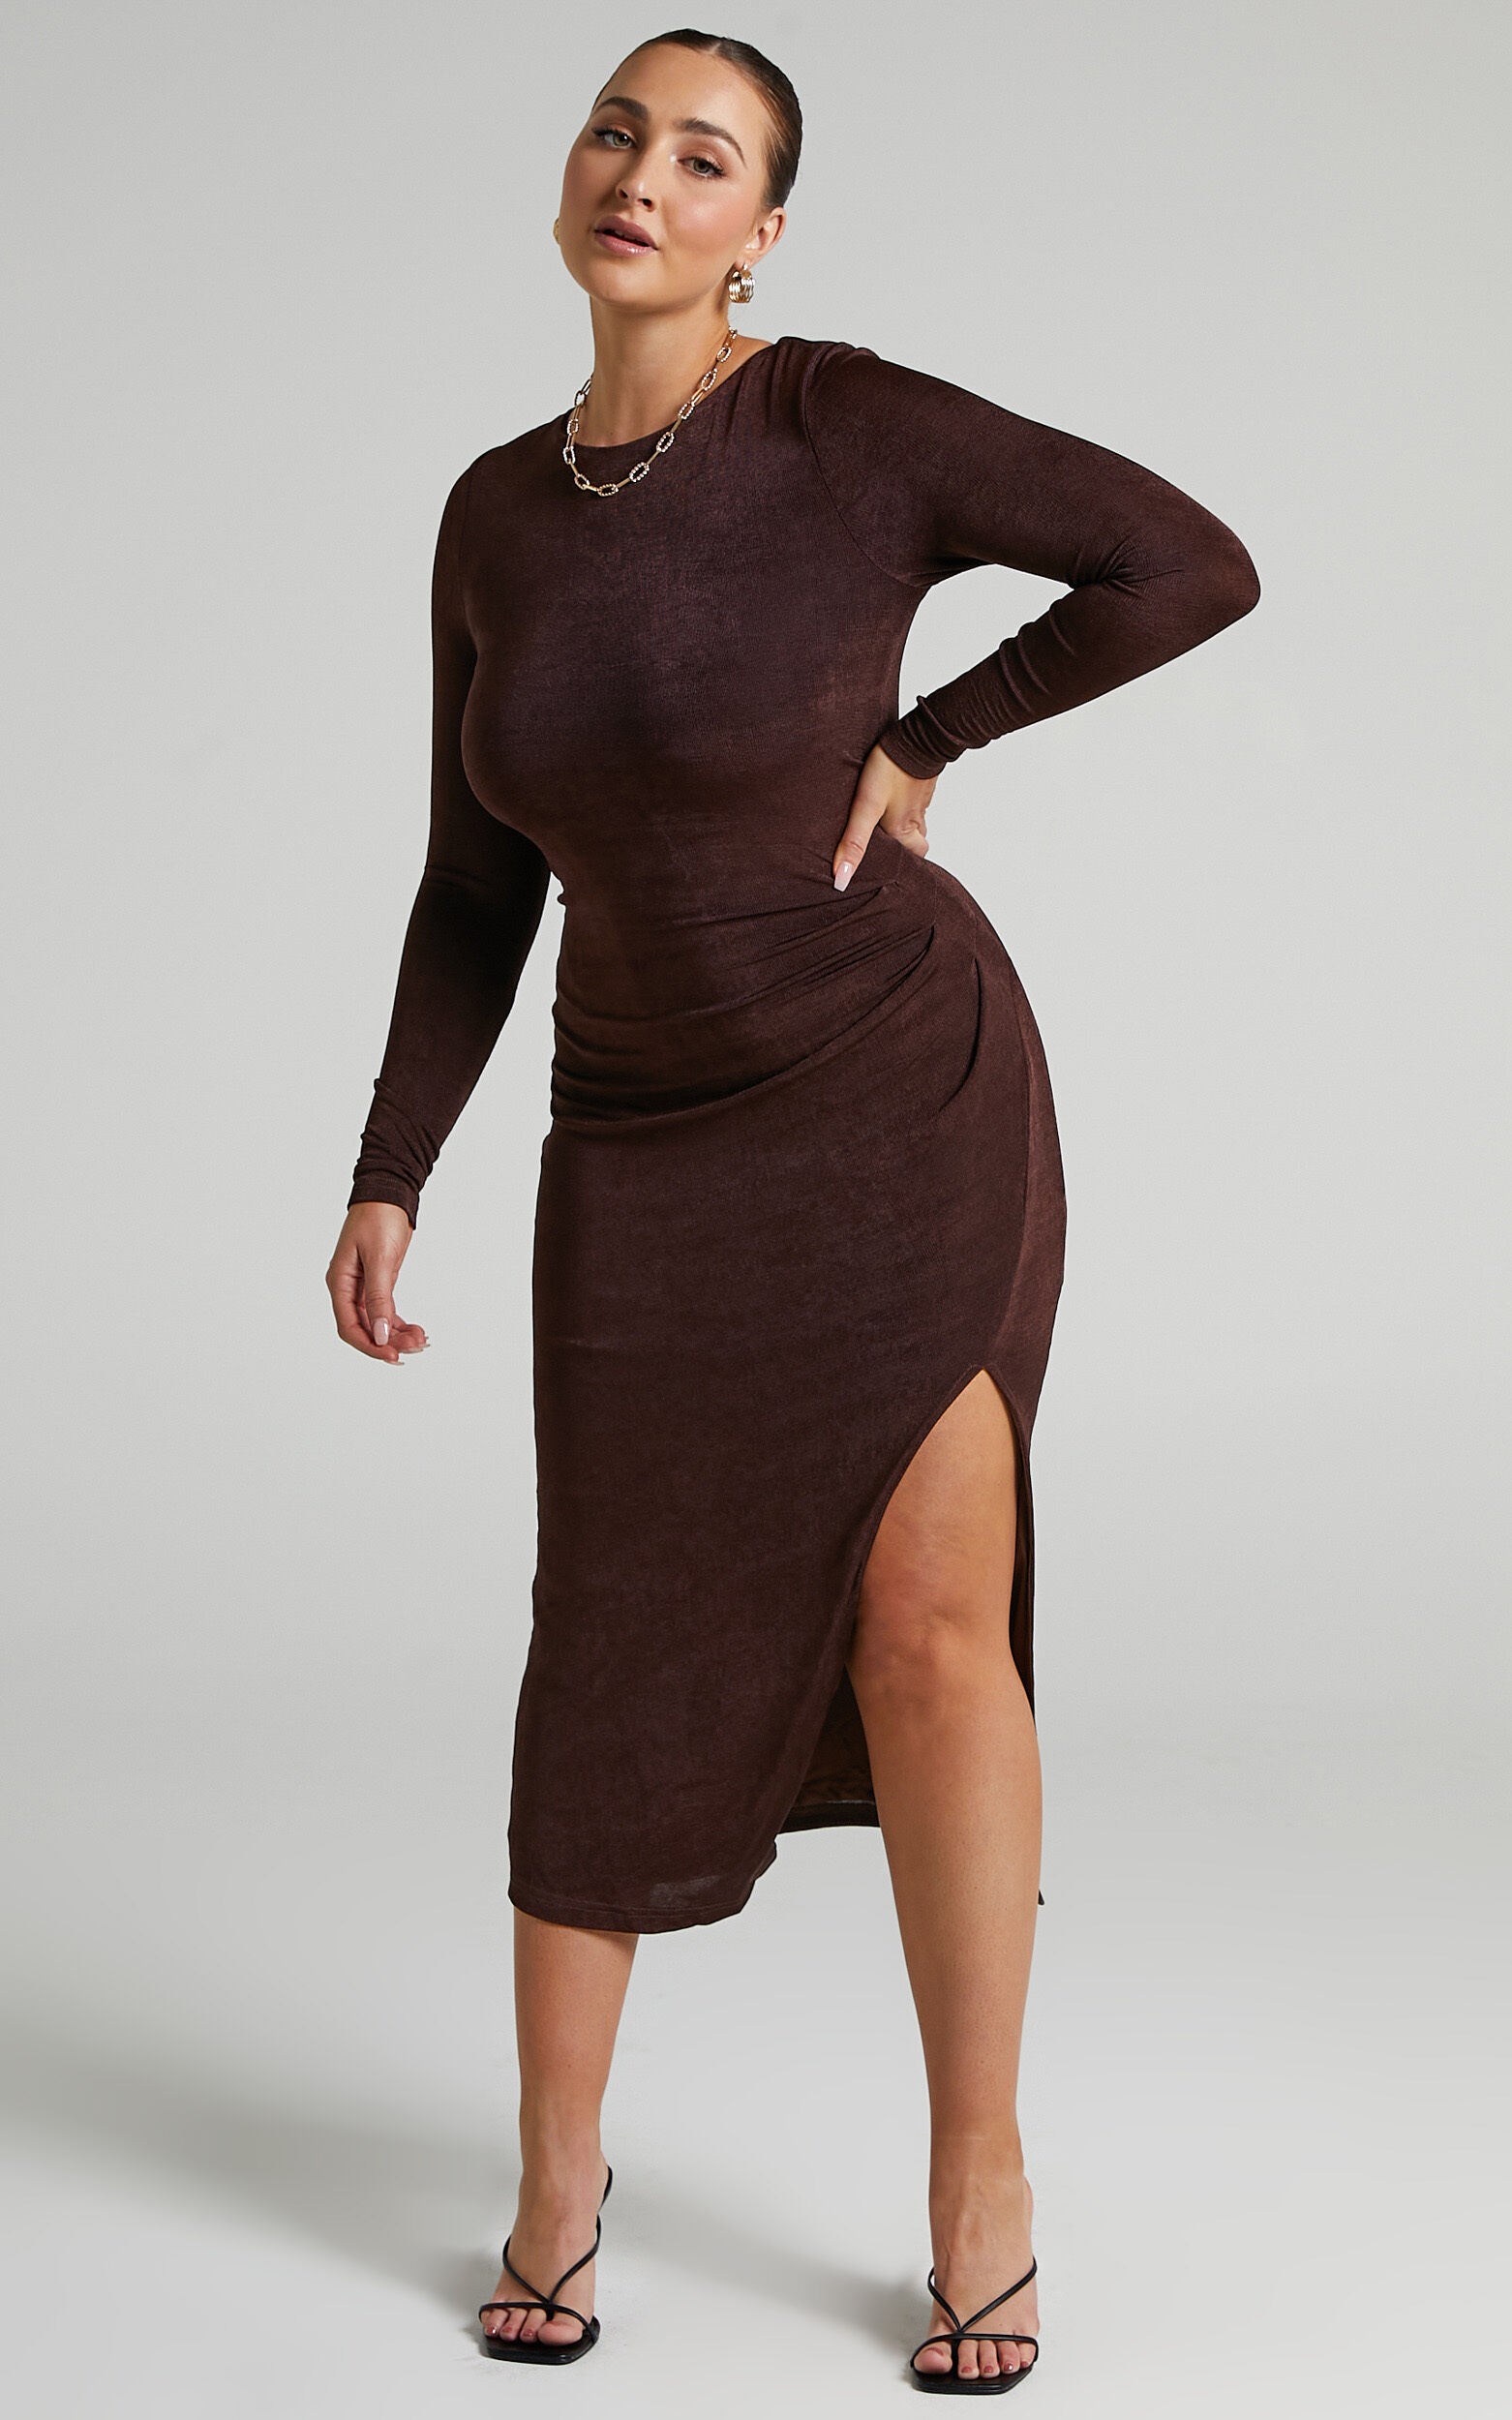 Eulalia Drawstring Open Back Midi Dress in Chocolate - 06, BRN2, super-hi-res image number null